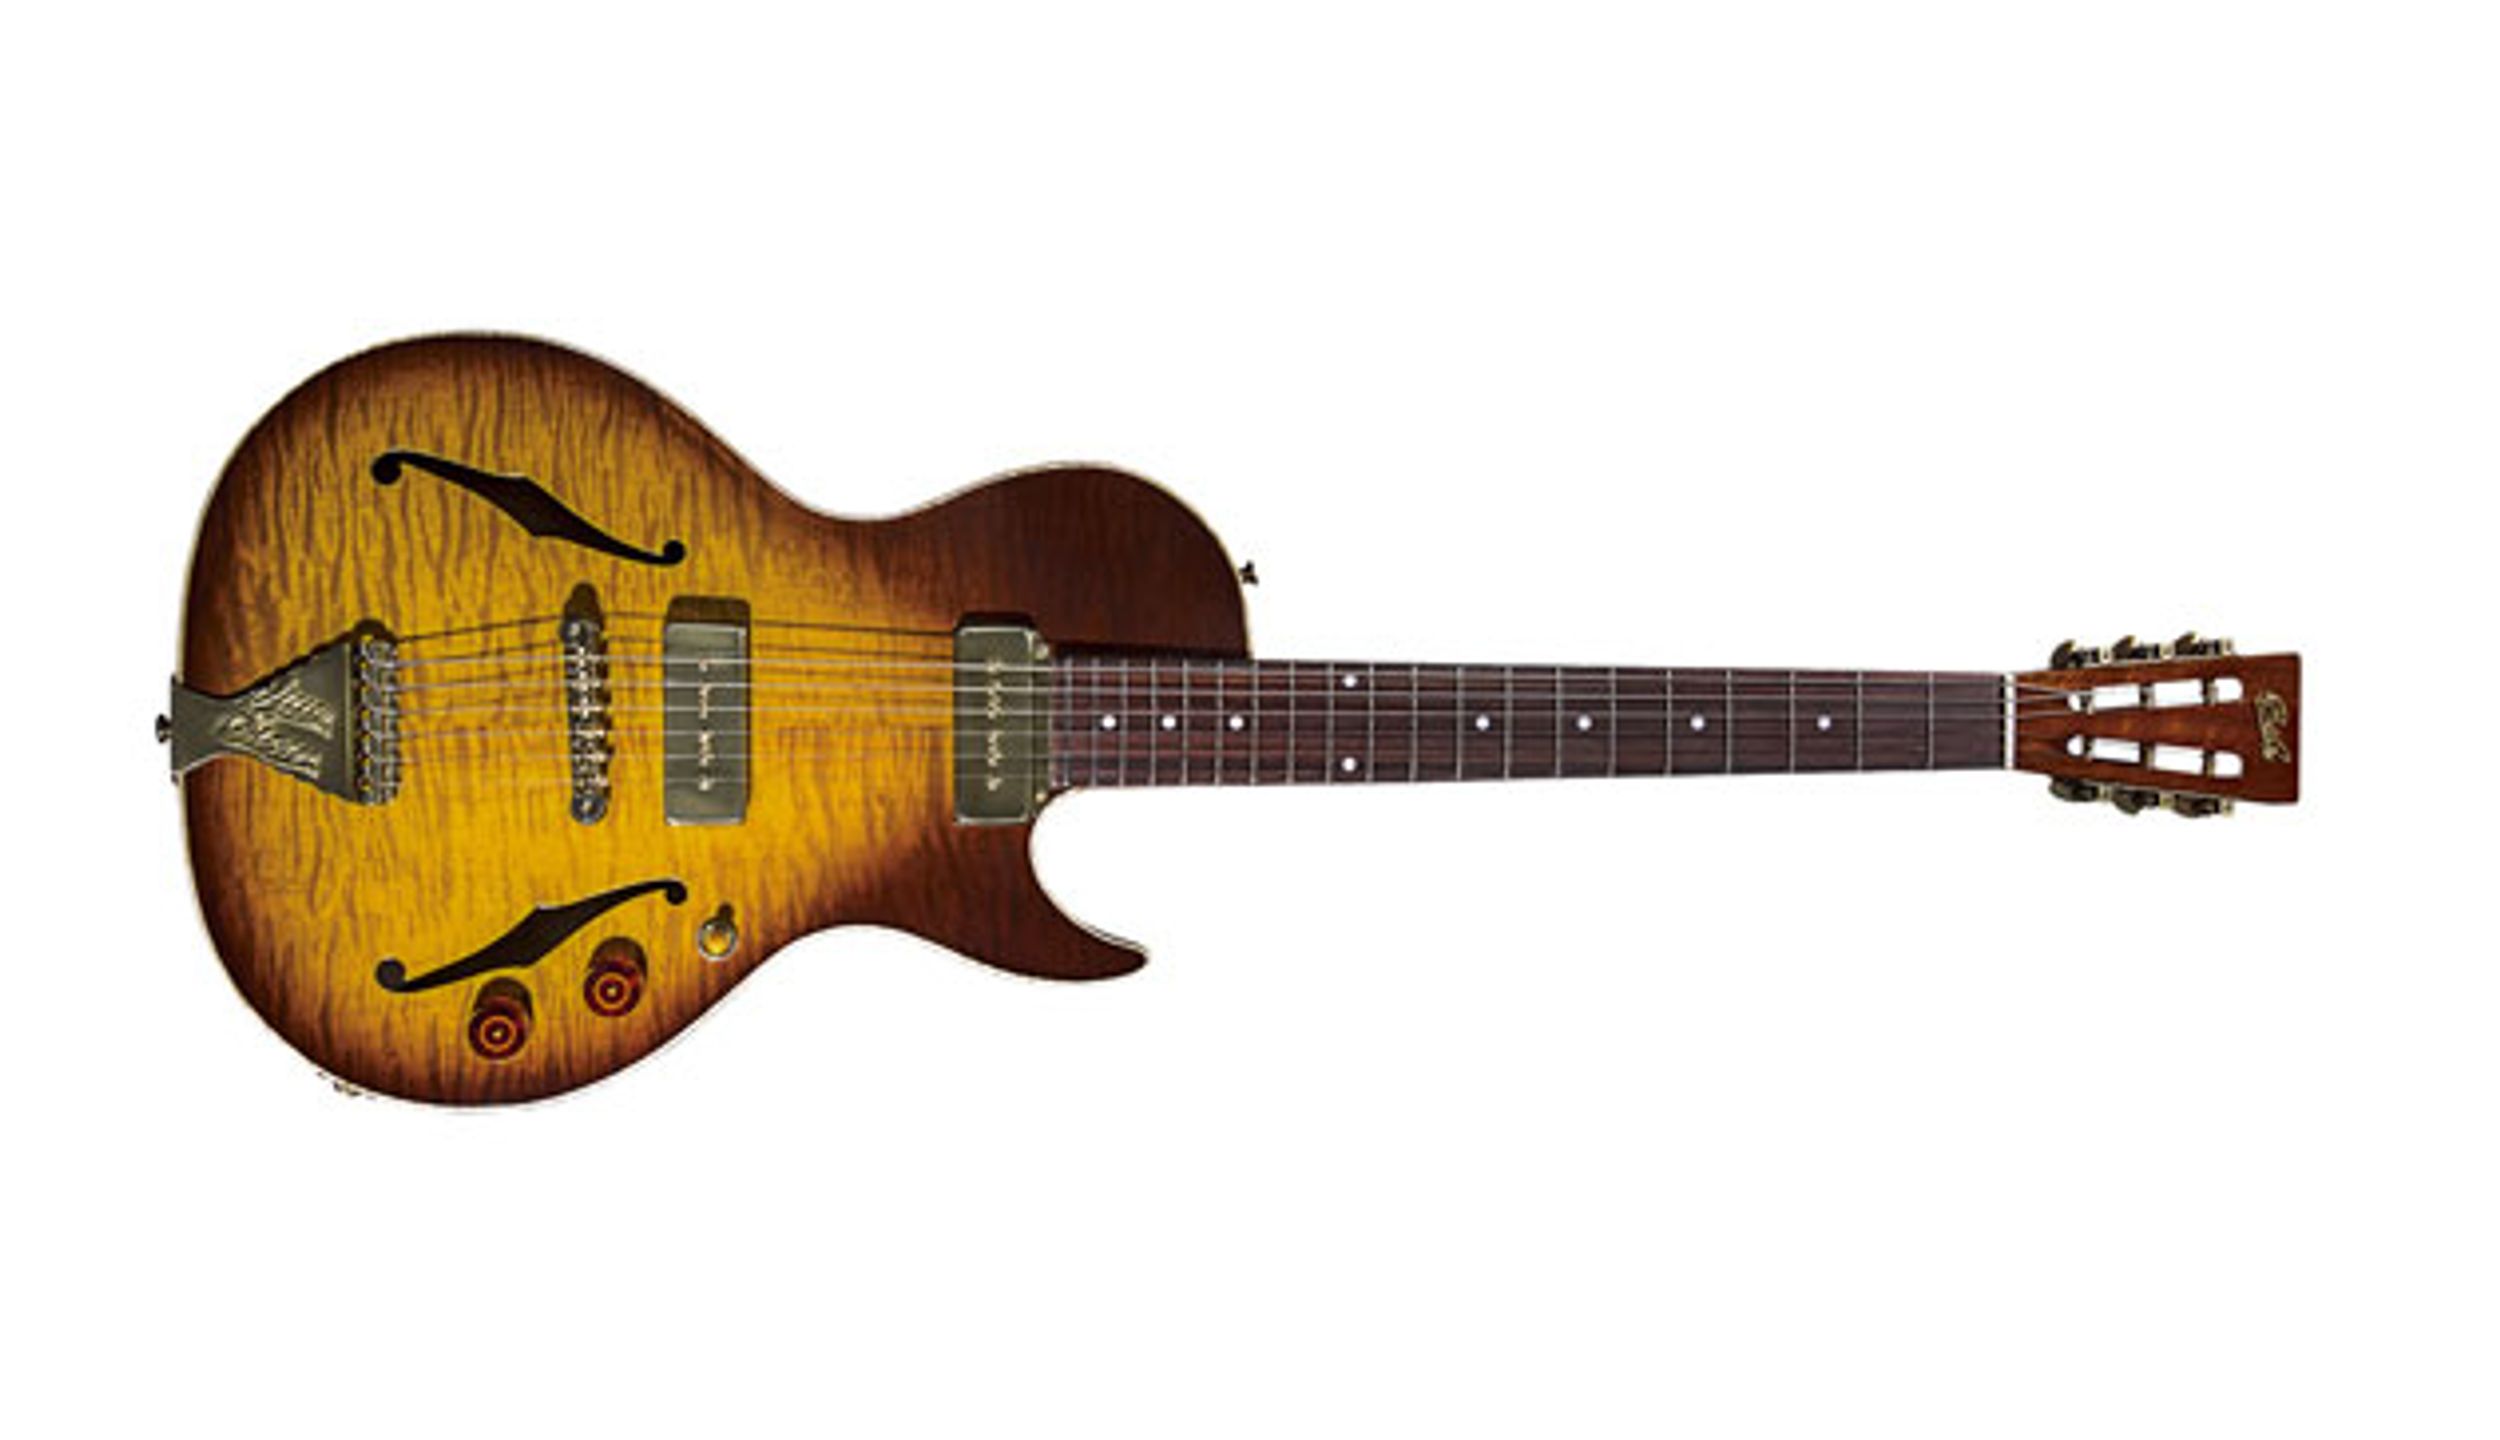 B&G Guitars Expands Its Line with the Crossroads Model